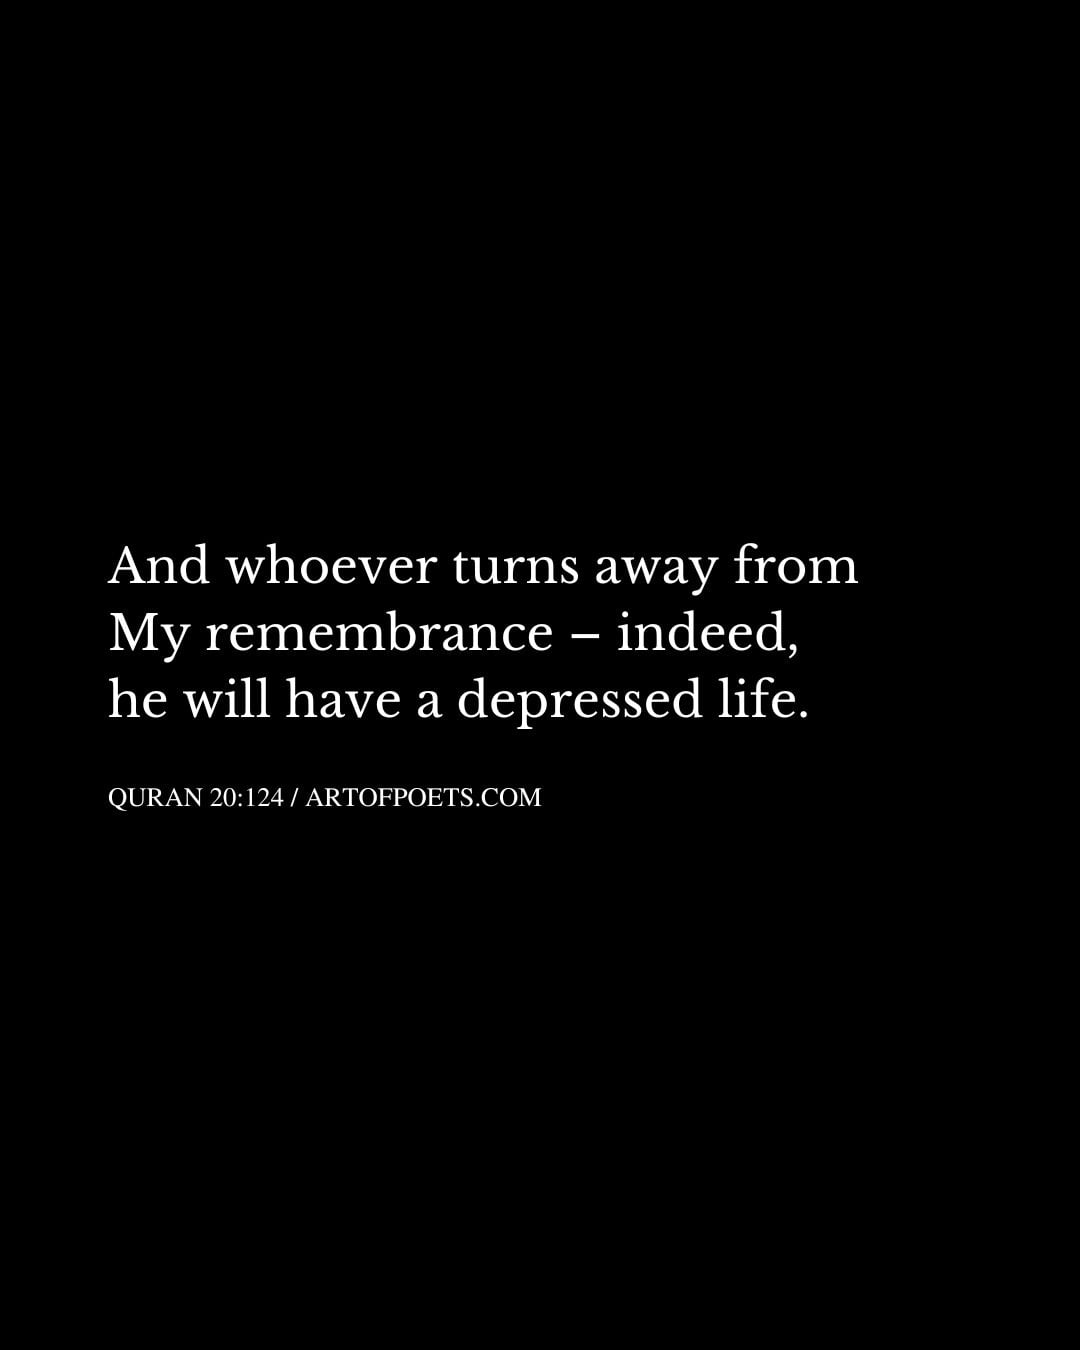 And whoever turns away from My remembrance – indeed he will have a depressed life 1